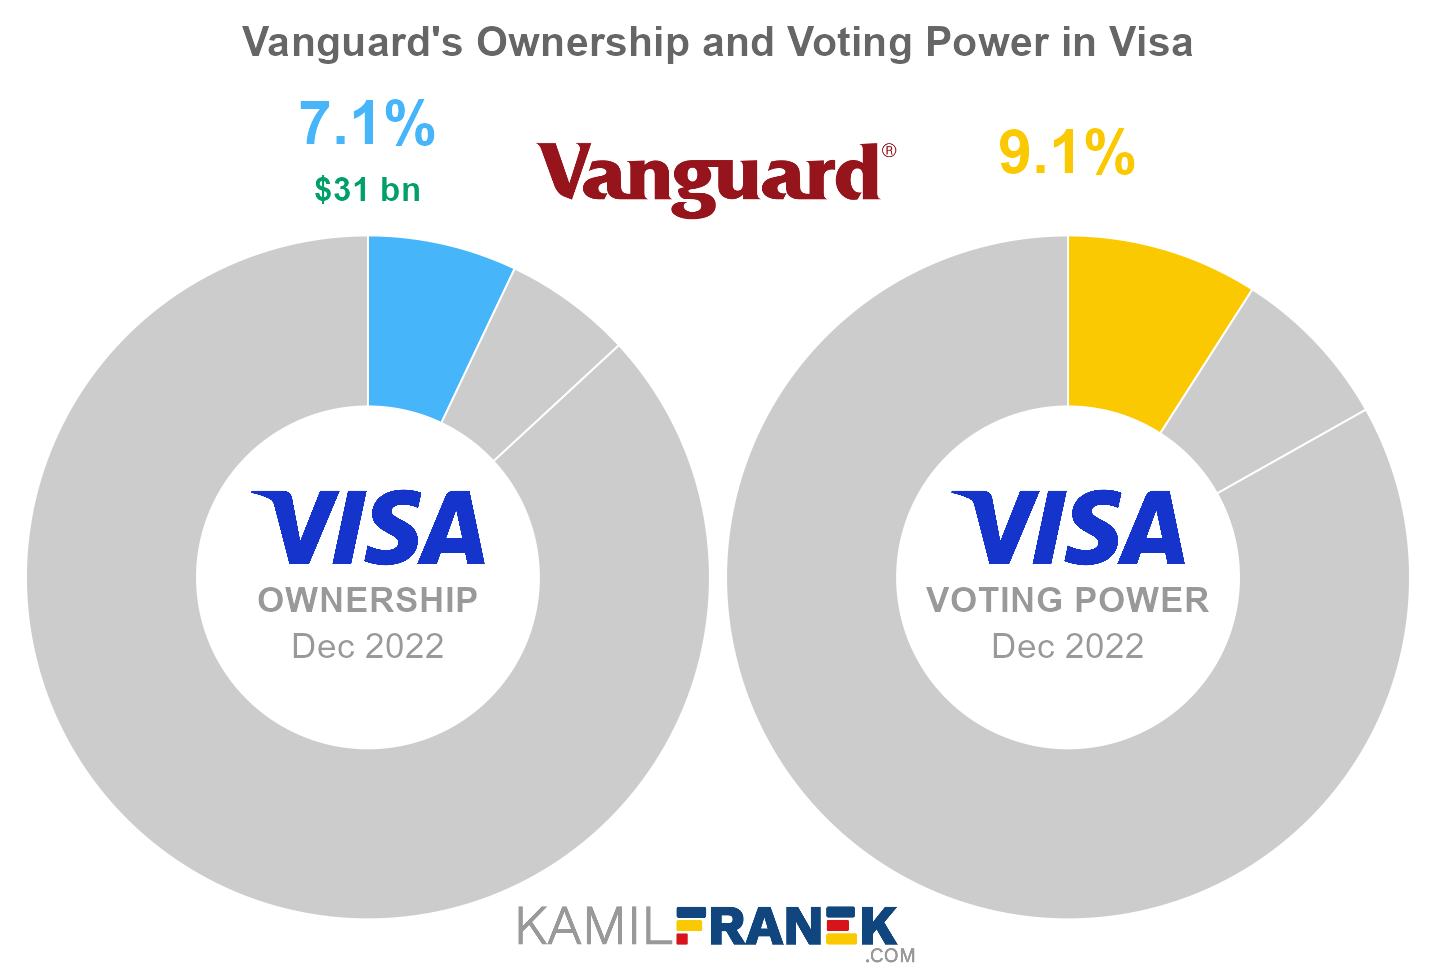 Vanguard's share ownership and voting power in Visa (chart)